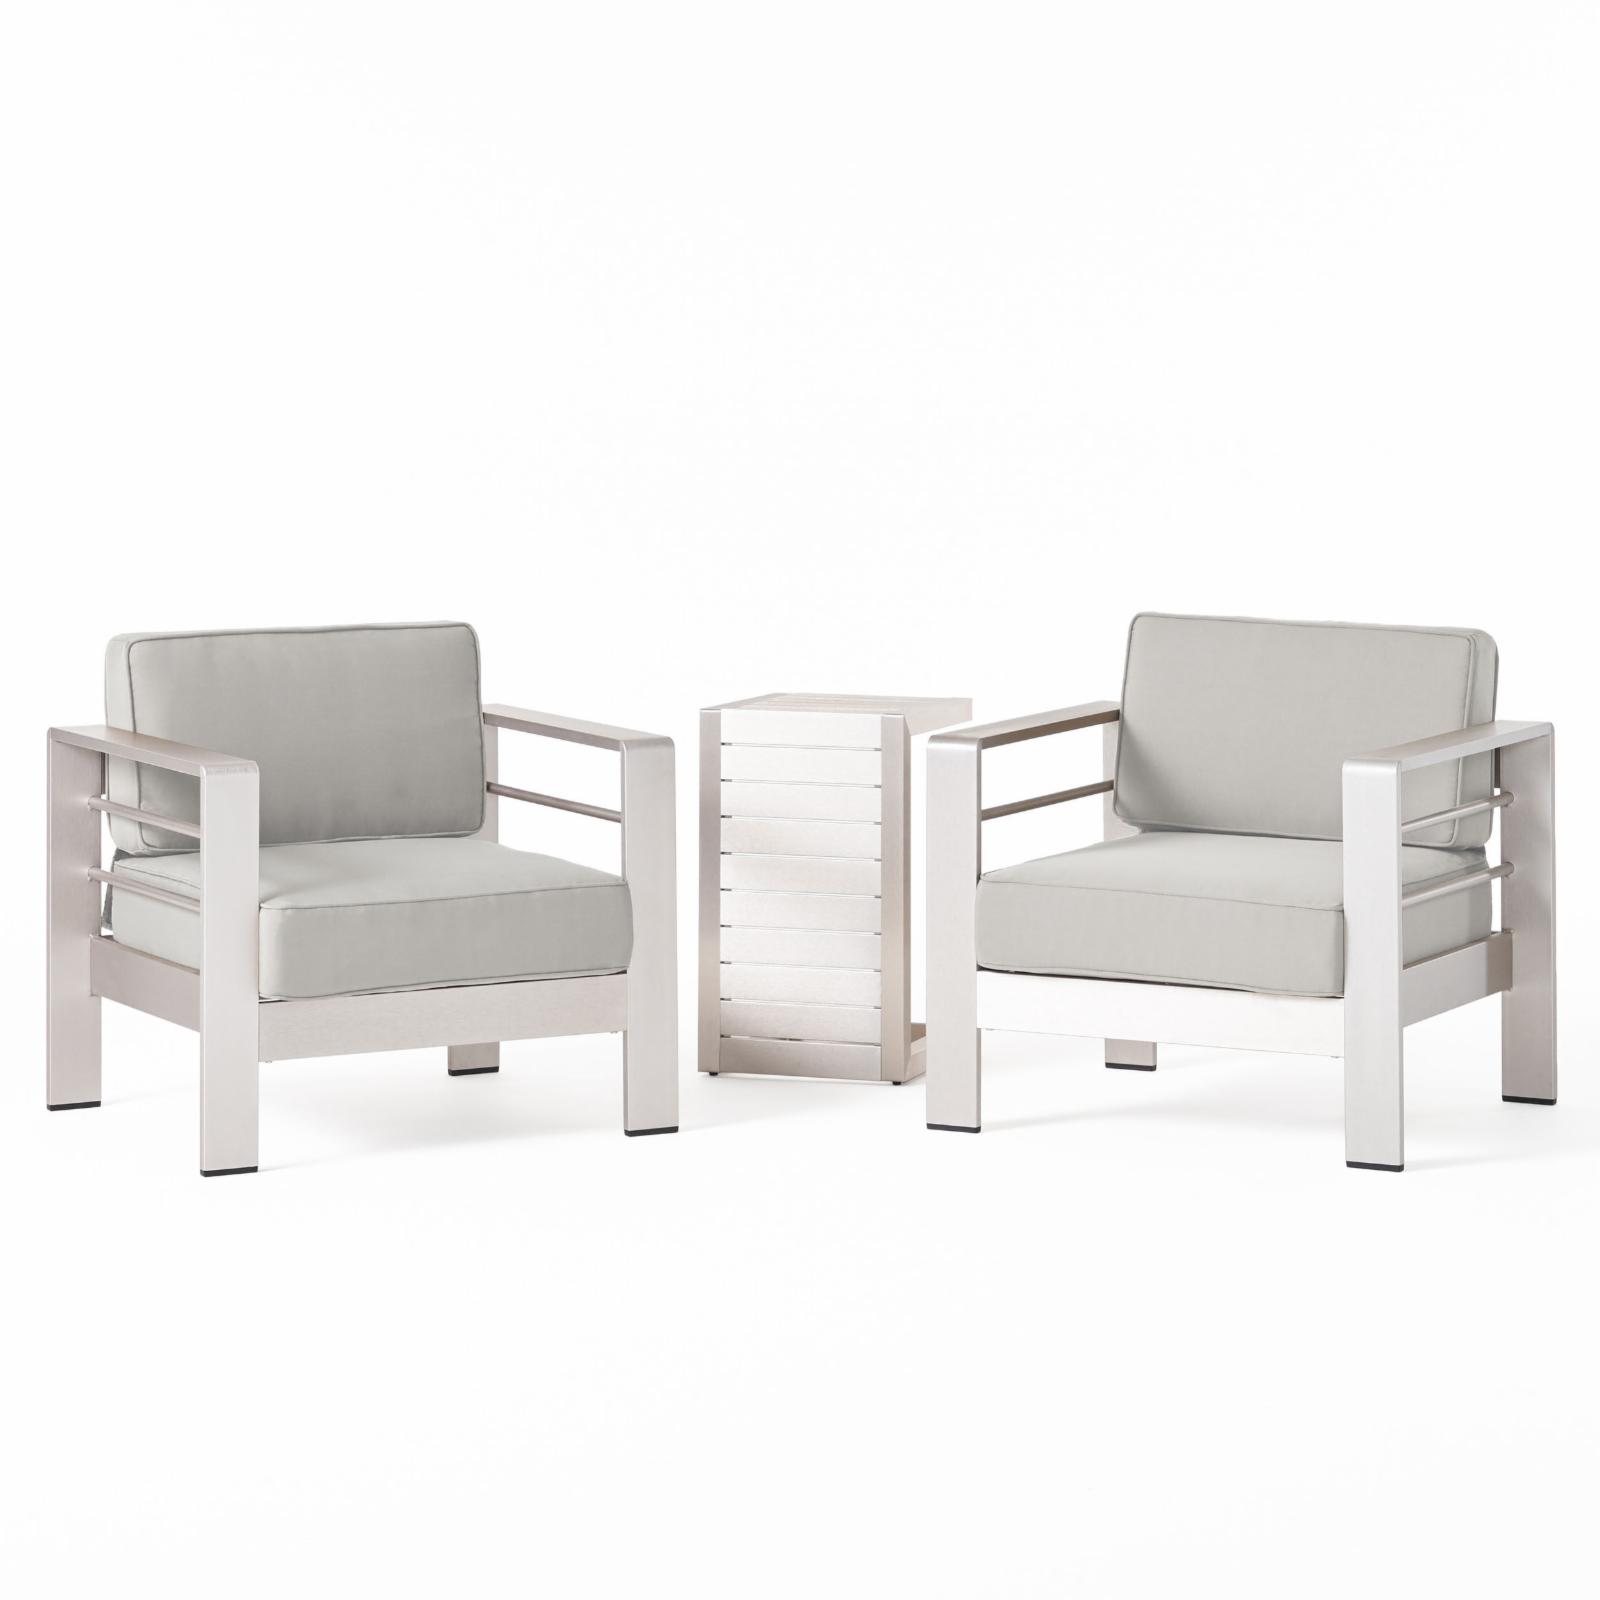 Xane Outdoor Club Chairs with Side Table - Aluminum and Khaki - image 5 of 10